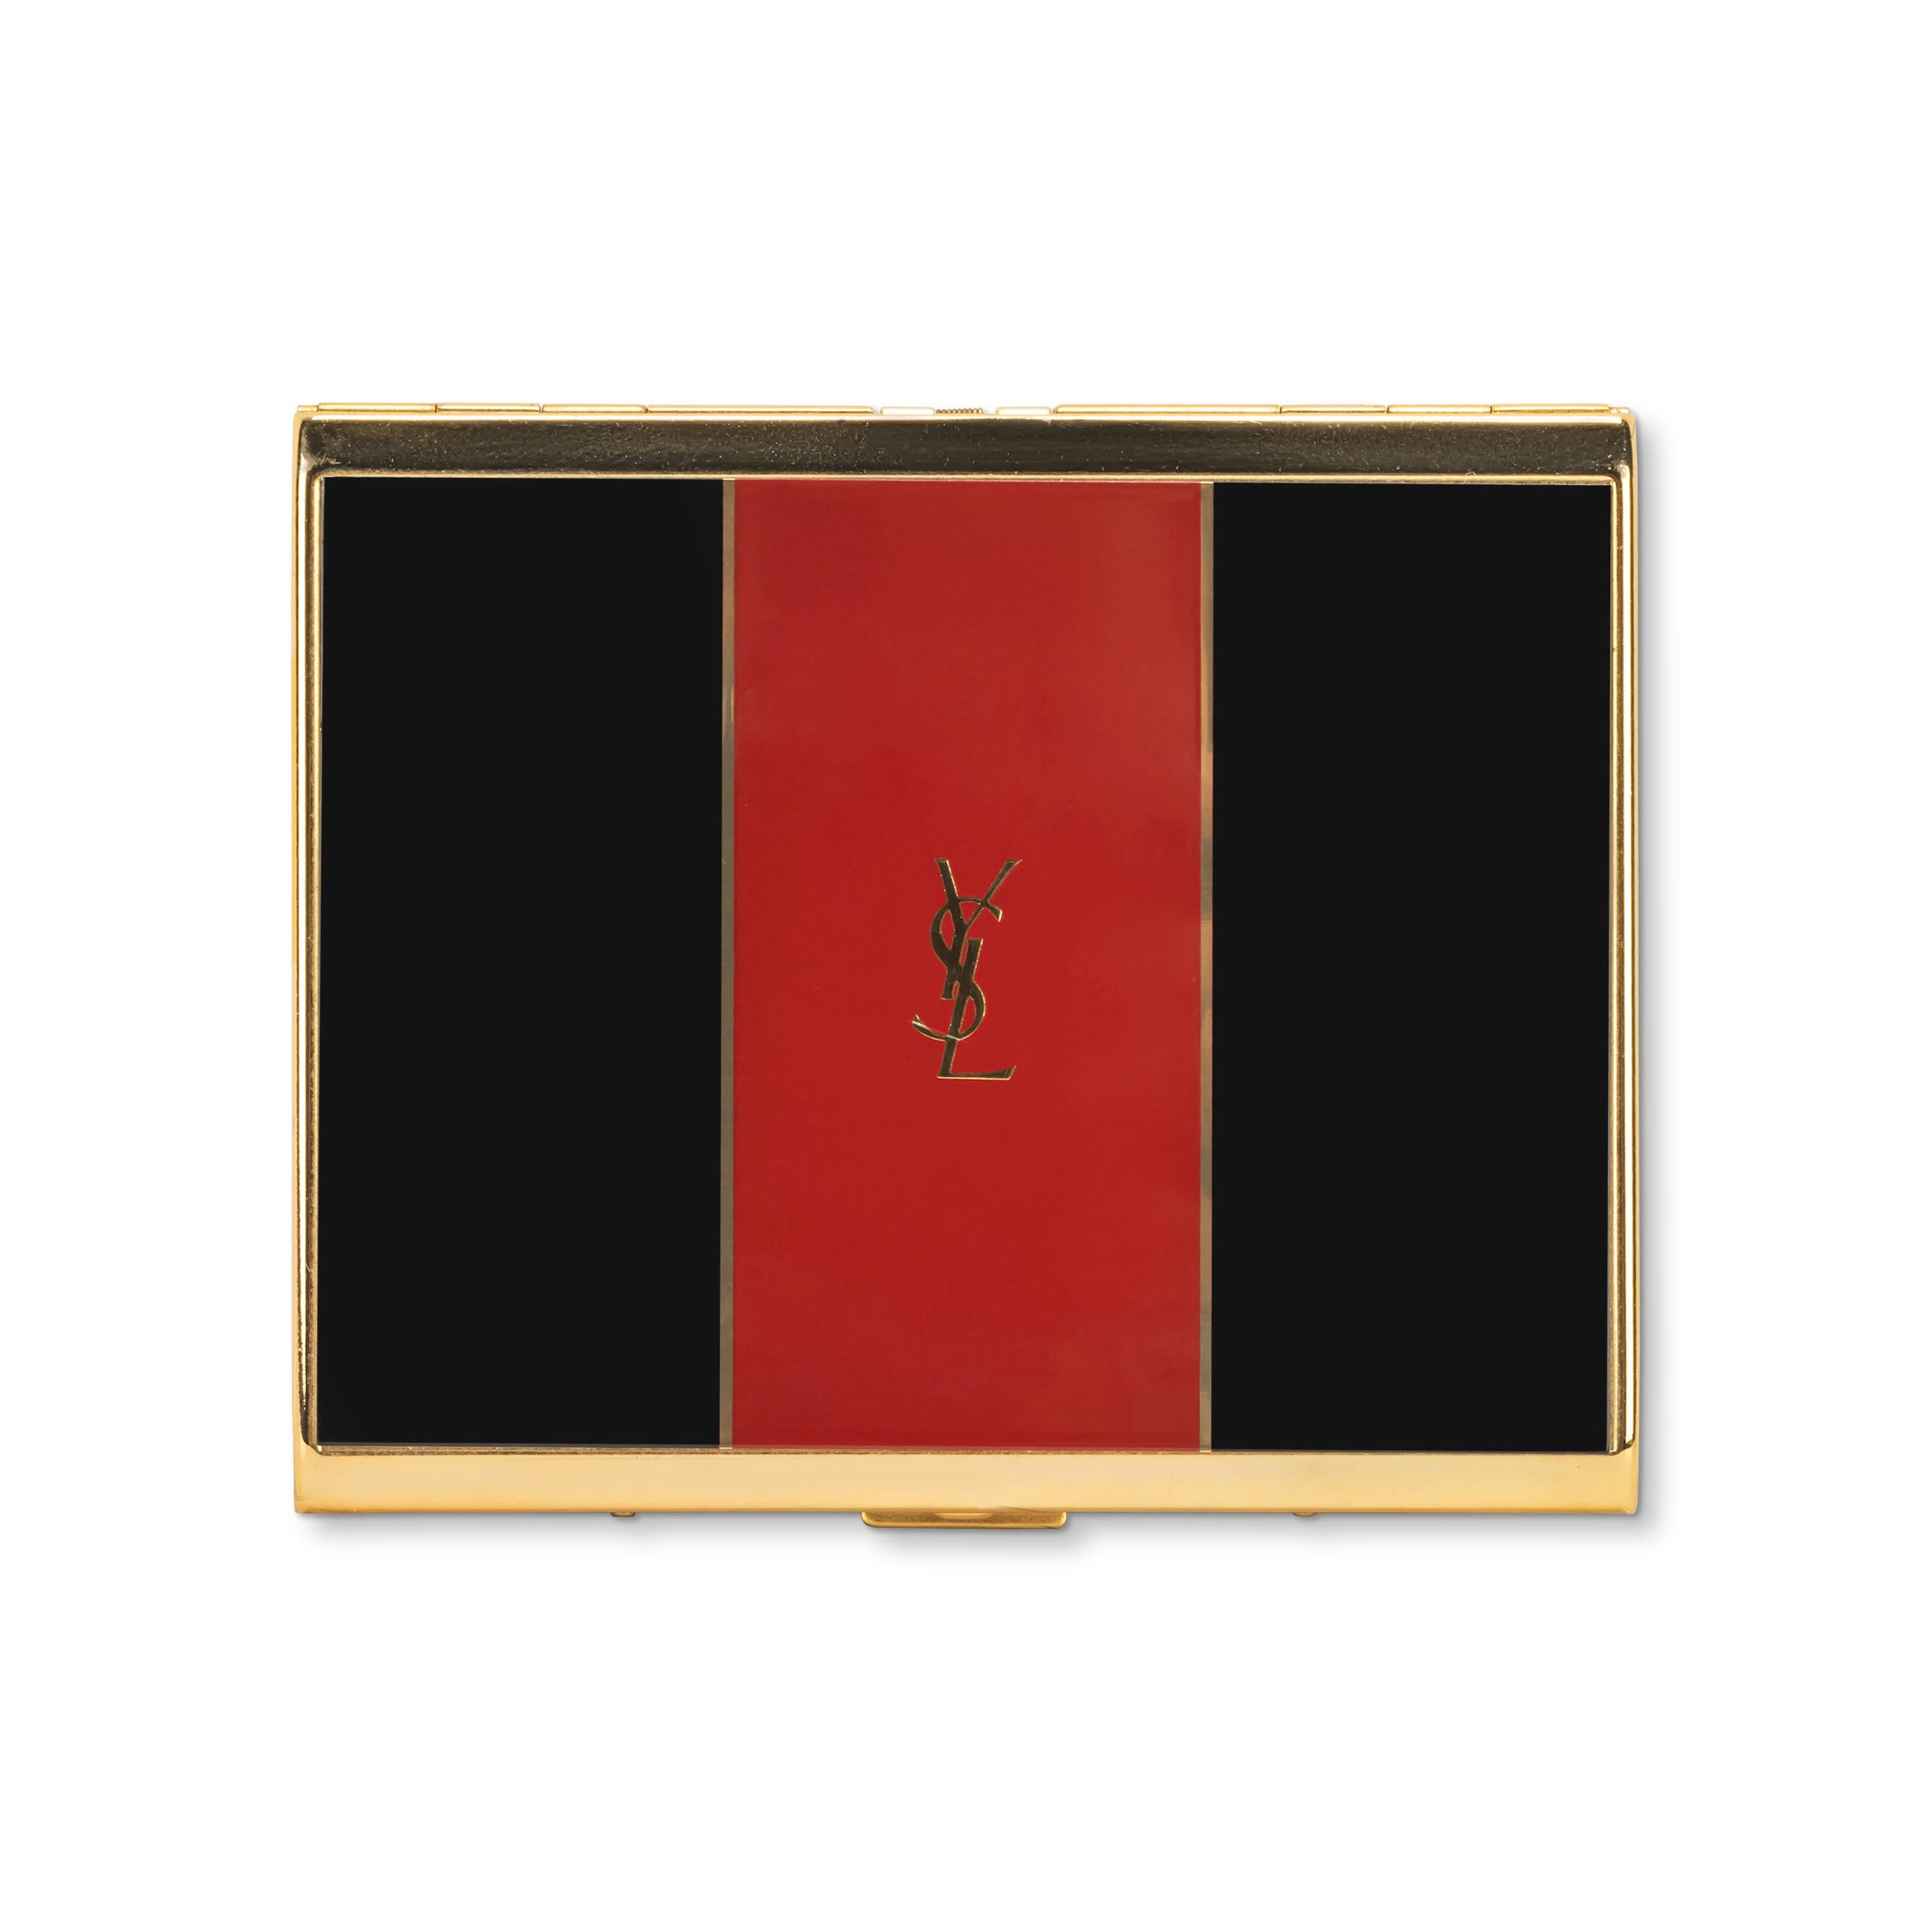 “YSL” Yves Saint Laurent retro cigarette case 
This is the large Case, Pelaee see images and video. 
Logo Cigarette Case Gold Black Red
The case is in great condition.
The clasp snaps as new. 
Retro. 
1970s
Gold plated. 
Signed YSL.
Very elegant and